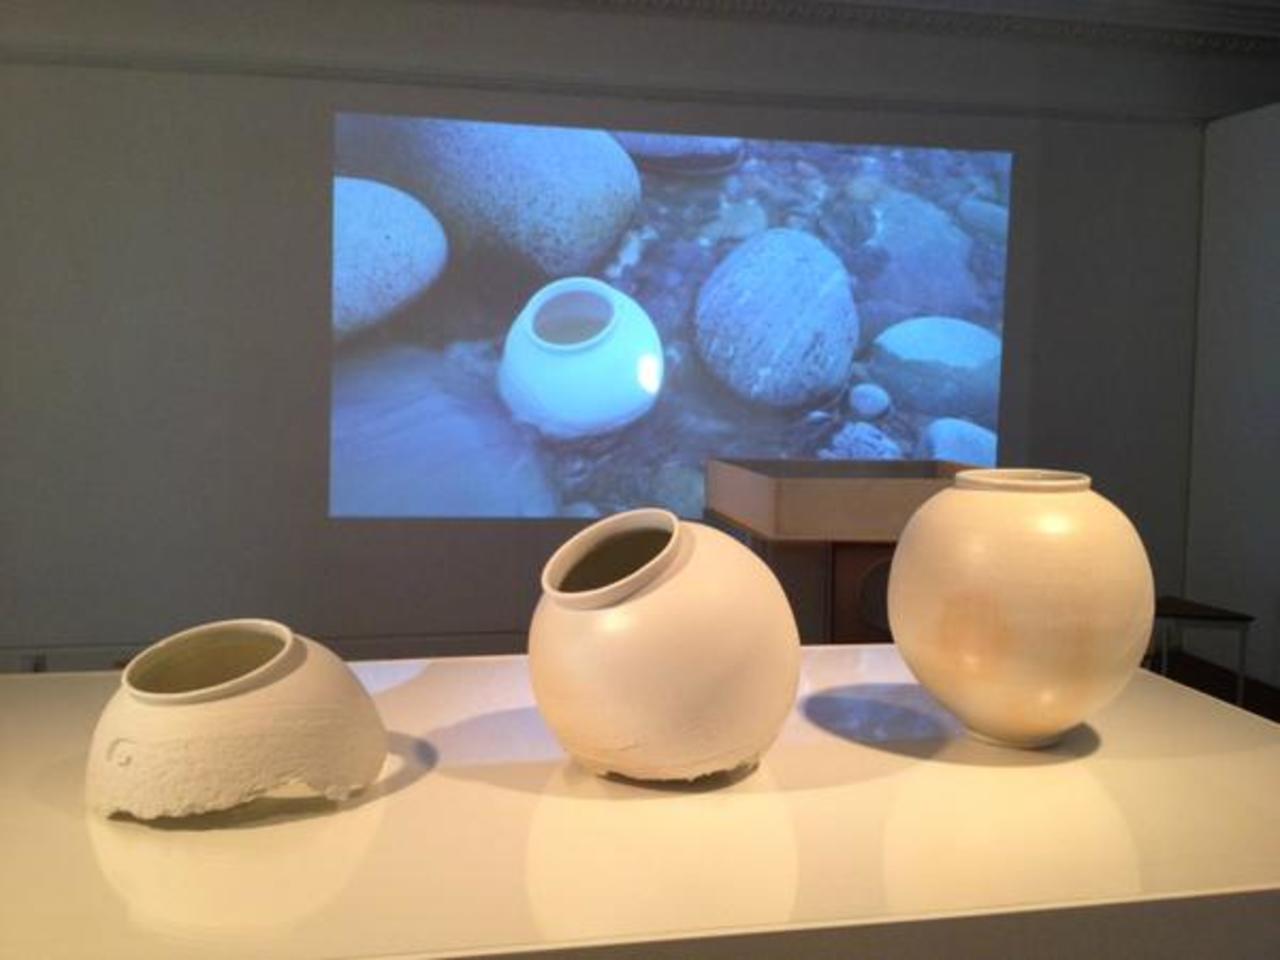 RT @hlhsocial: Interested in #ceramics #crafts #film?Visit the Real to Reel Exhibition @StFergusGallery #Wick http://ow.ly/L2k2W http://t.co/LJW7hwQKAK